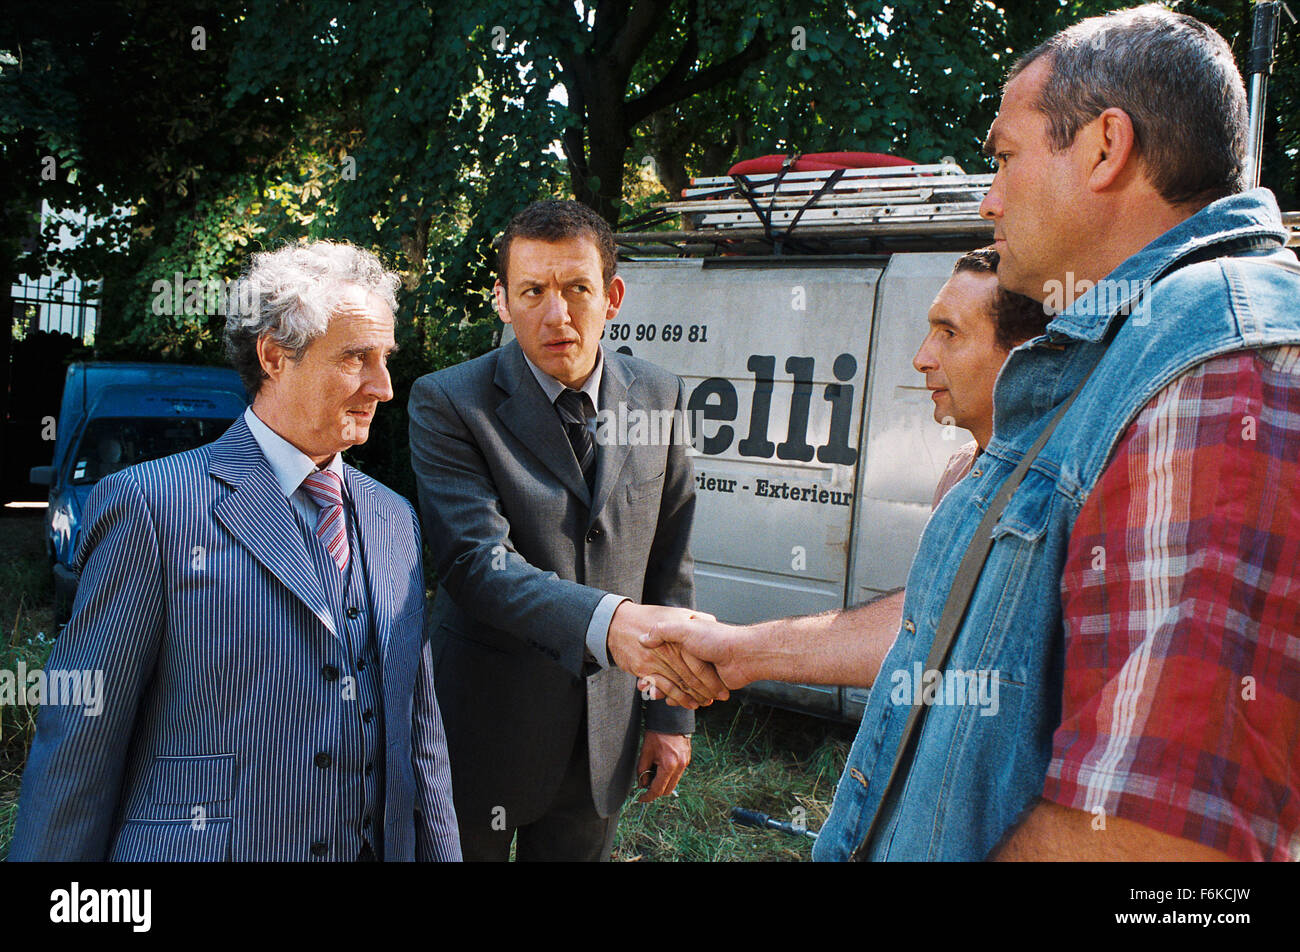 RELEASE DATE: June 07, 2006. MOVIE TITLE: La Maison Du Bonheur. STUDIO: Pathe Renn Productions. PLOT: On a mission to loosen up, a miser's sets about buying a house in the country for his family. PICTURED: DANIEL PREVOST as Jean-Pierre Draquart and DANY BOON as Charles Boulin. Stock Photo